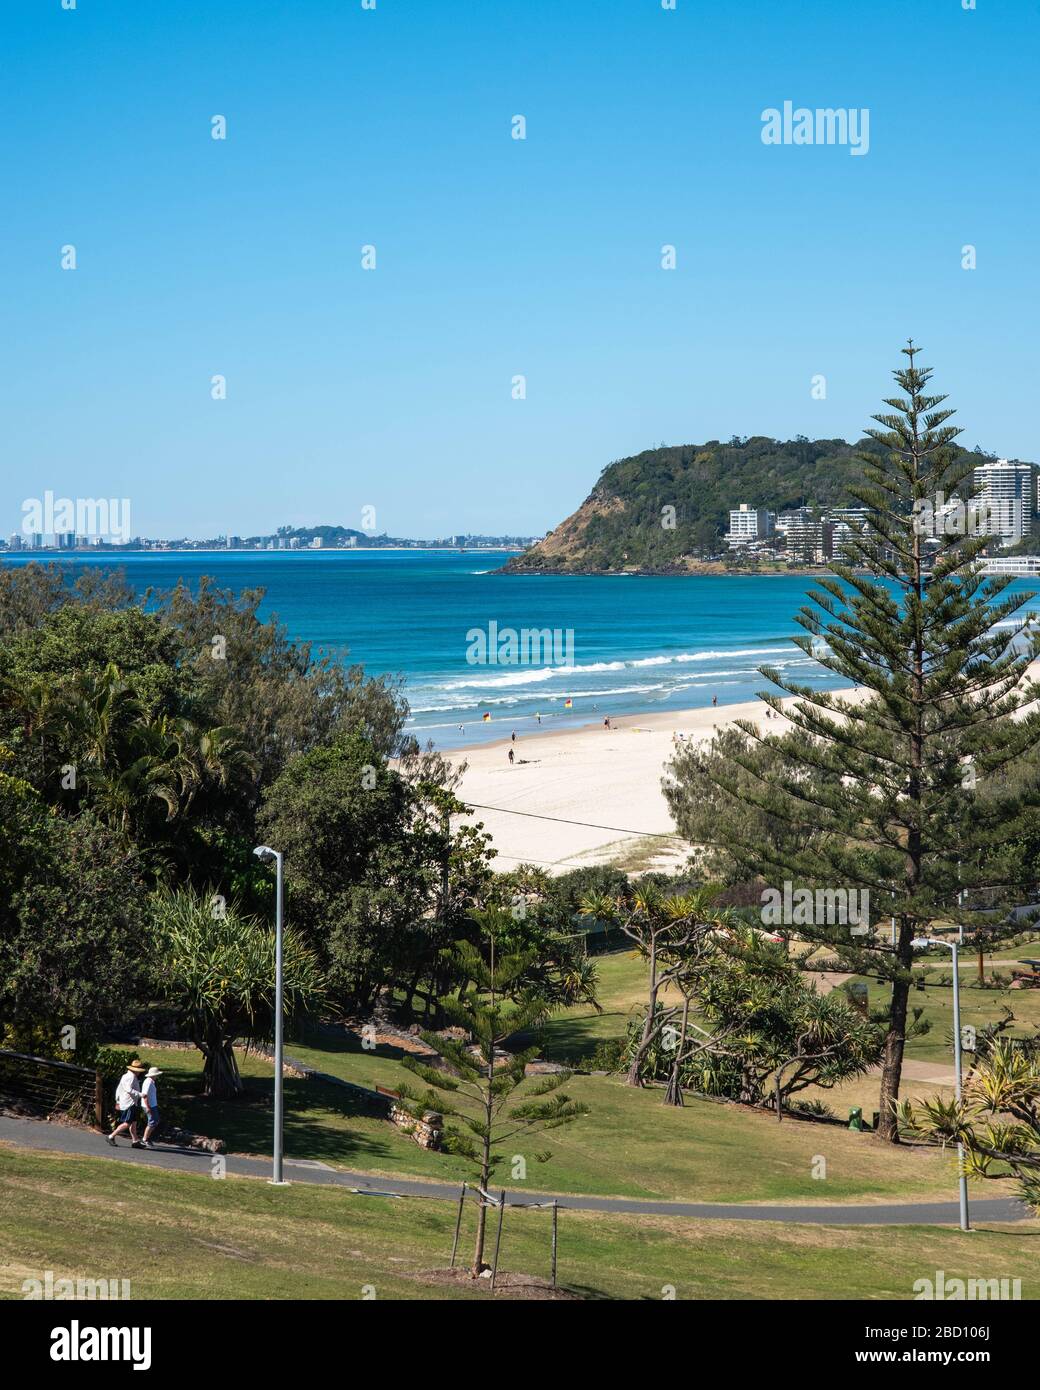 A view of a quiet Burleigh Heads and beach.New South Wales and Queensland cities decide to shutdown beaches. Australian authorities are taking actions to reduce crowded places including beaches to stop the spread of Covid-19. Stock Photo